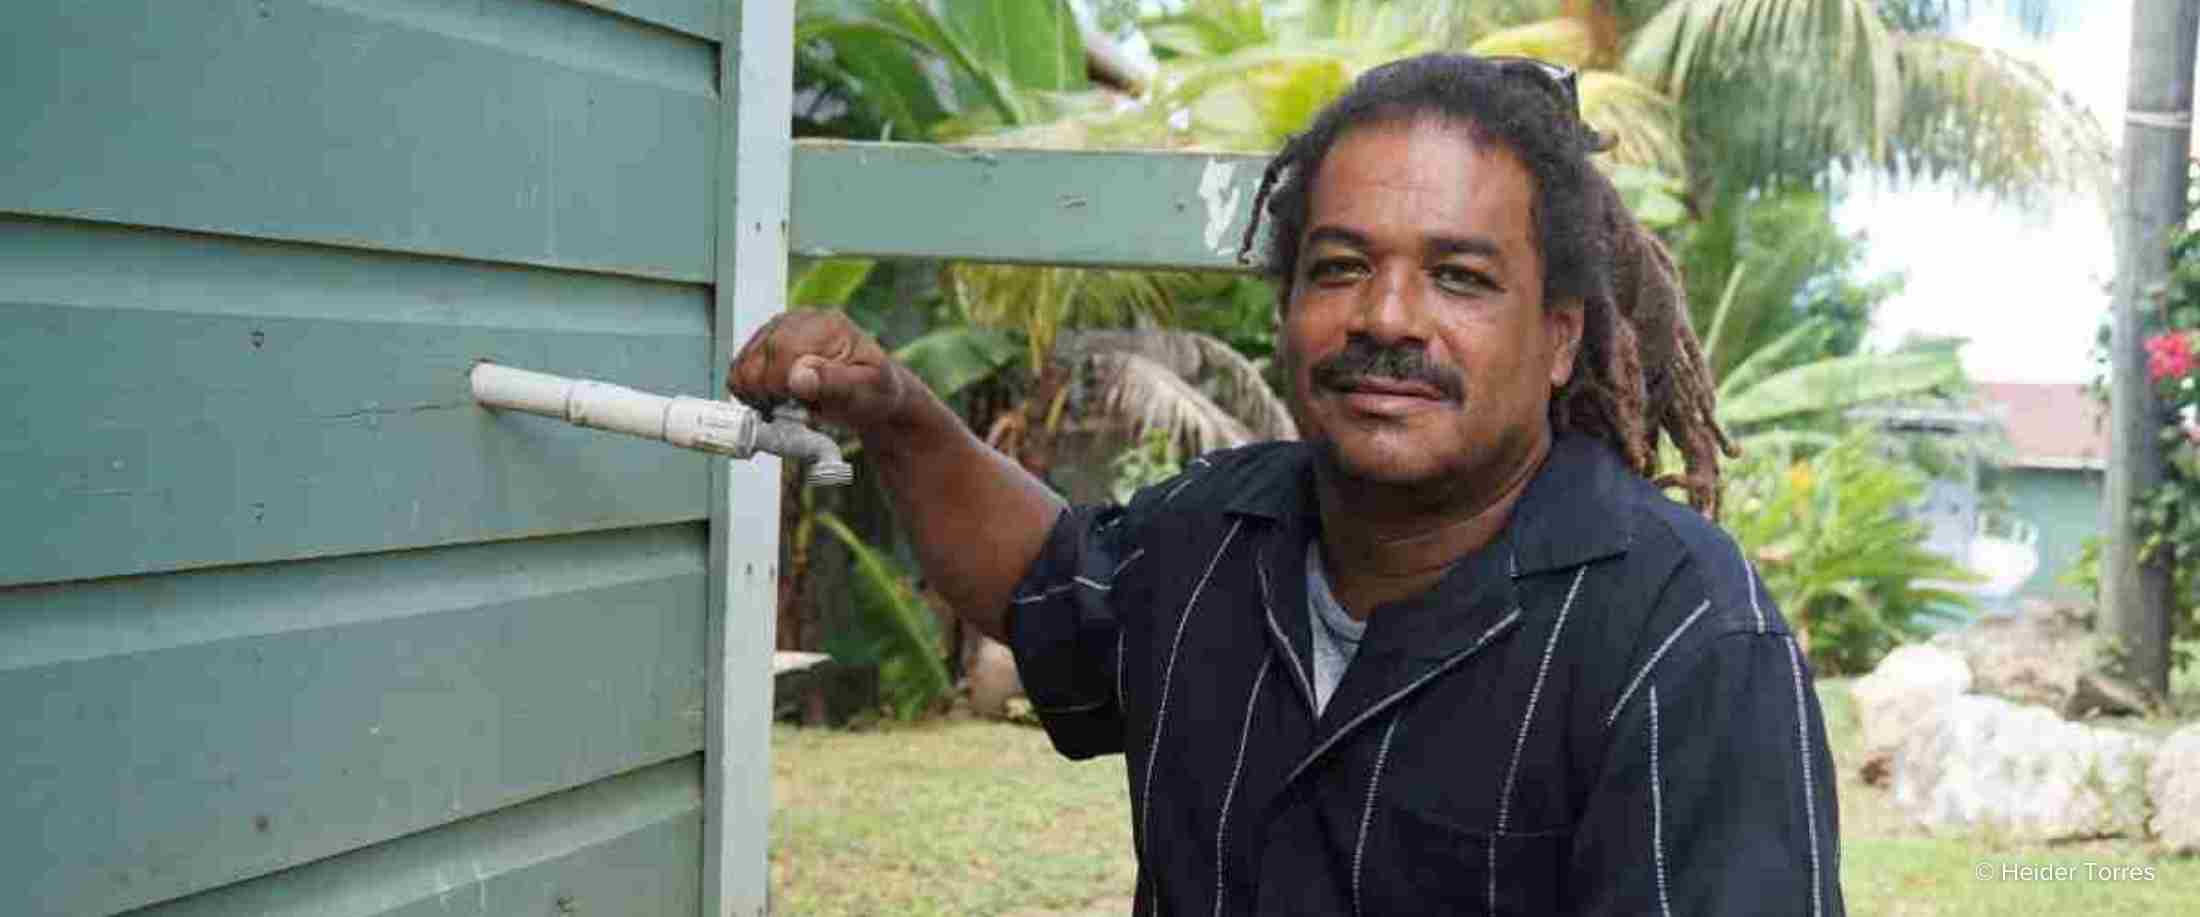 Leo Anderson, the manager of Roatán's wastewater plant poses next to a home that has been hooked up to the plant's treatment system